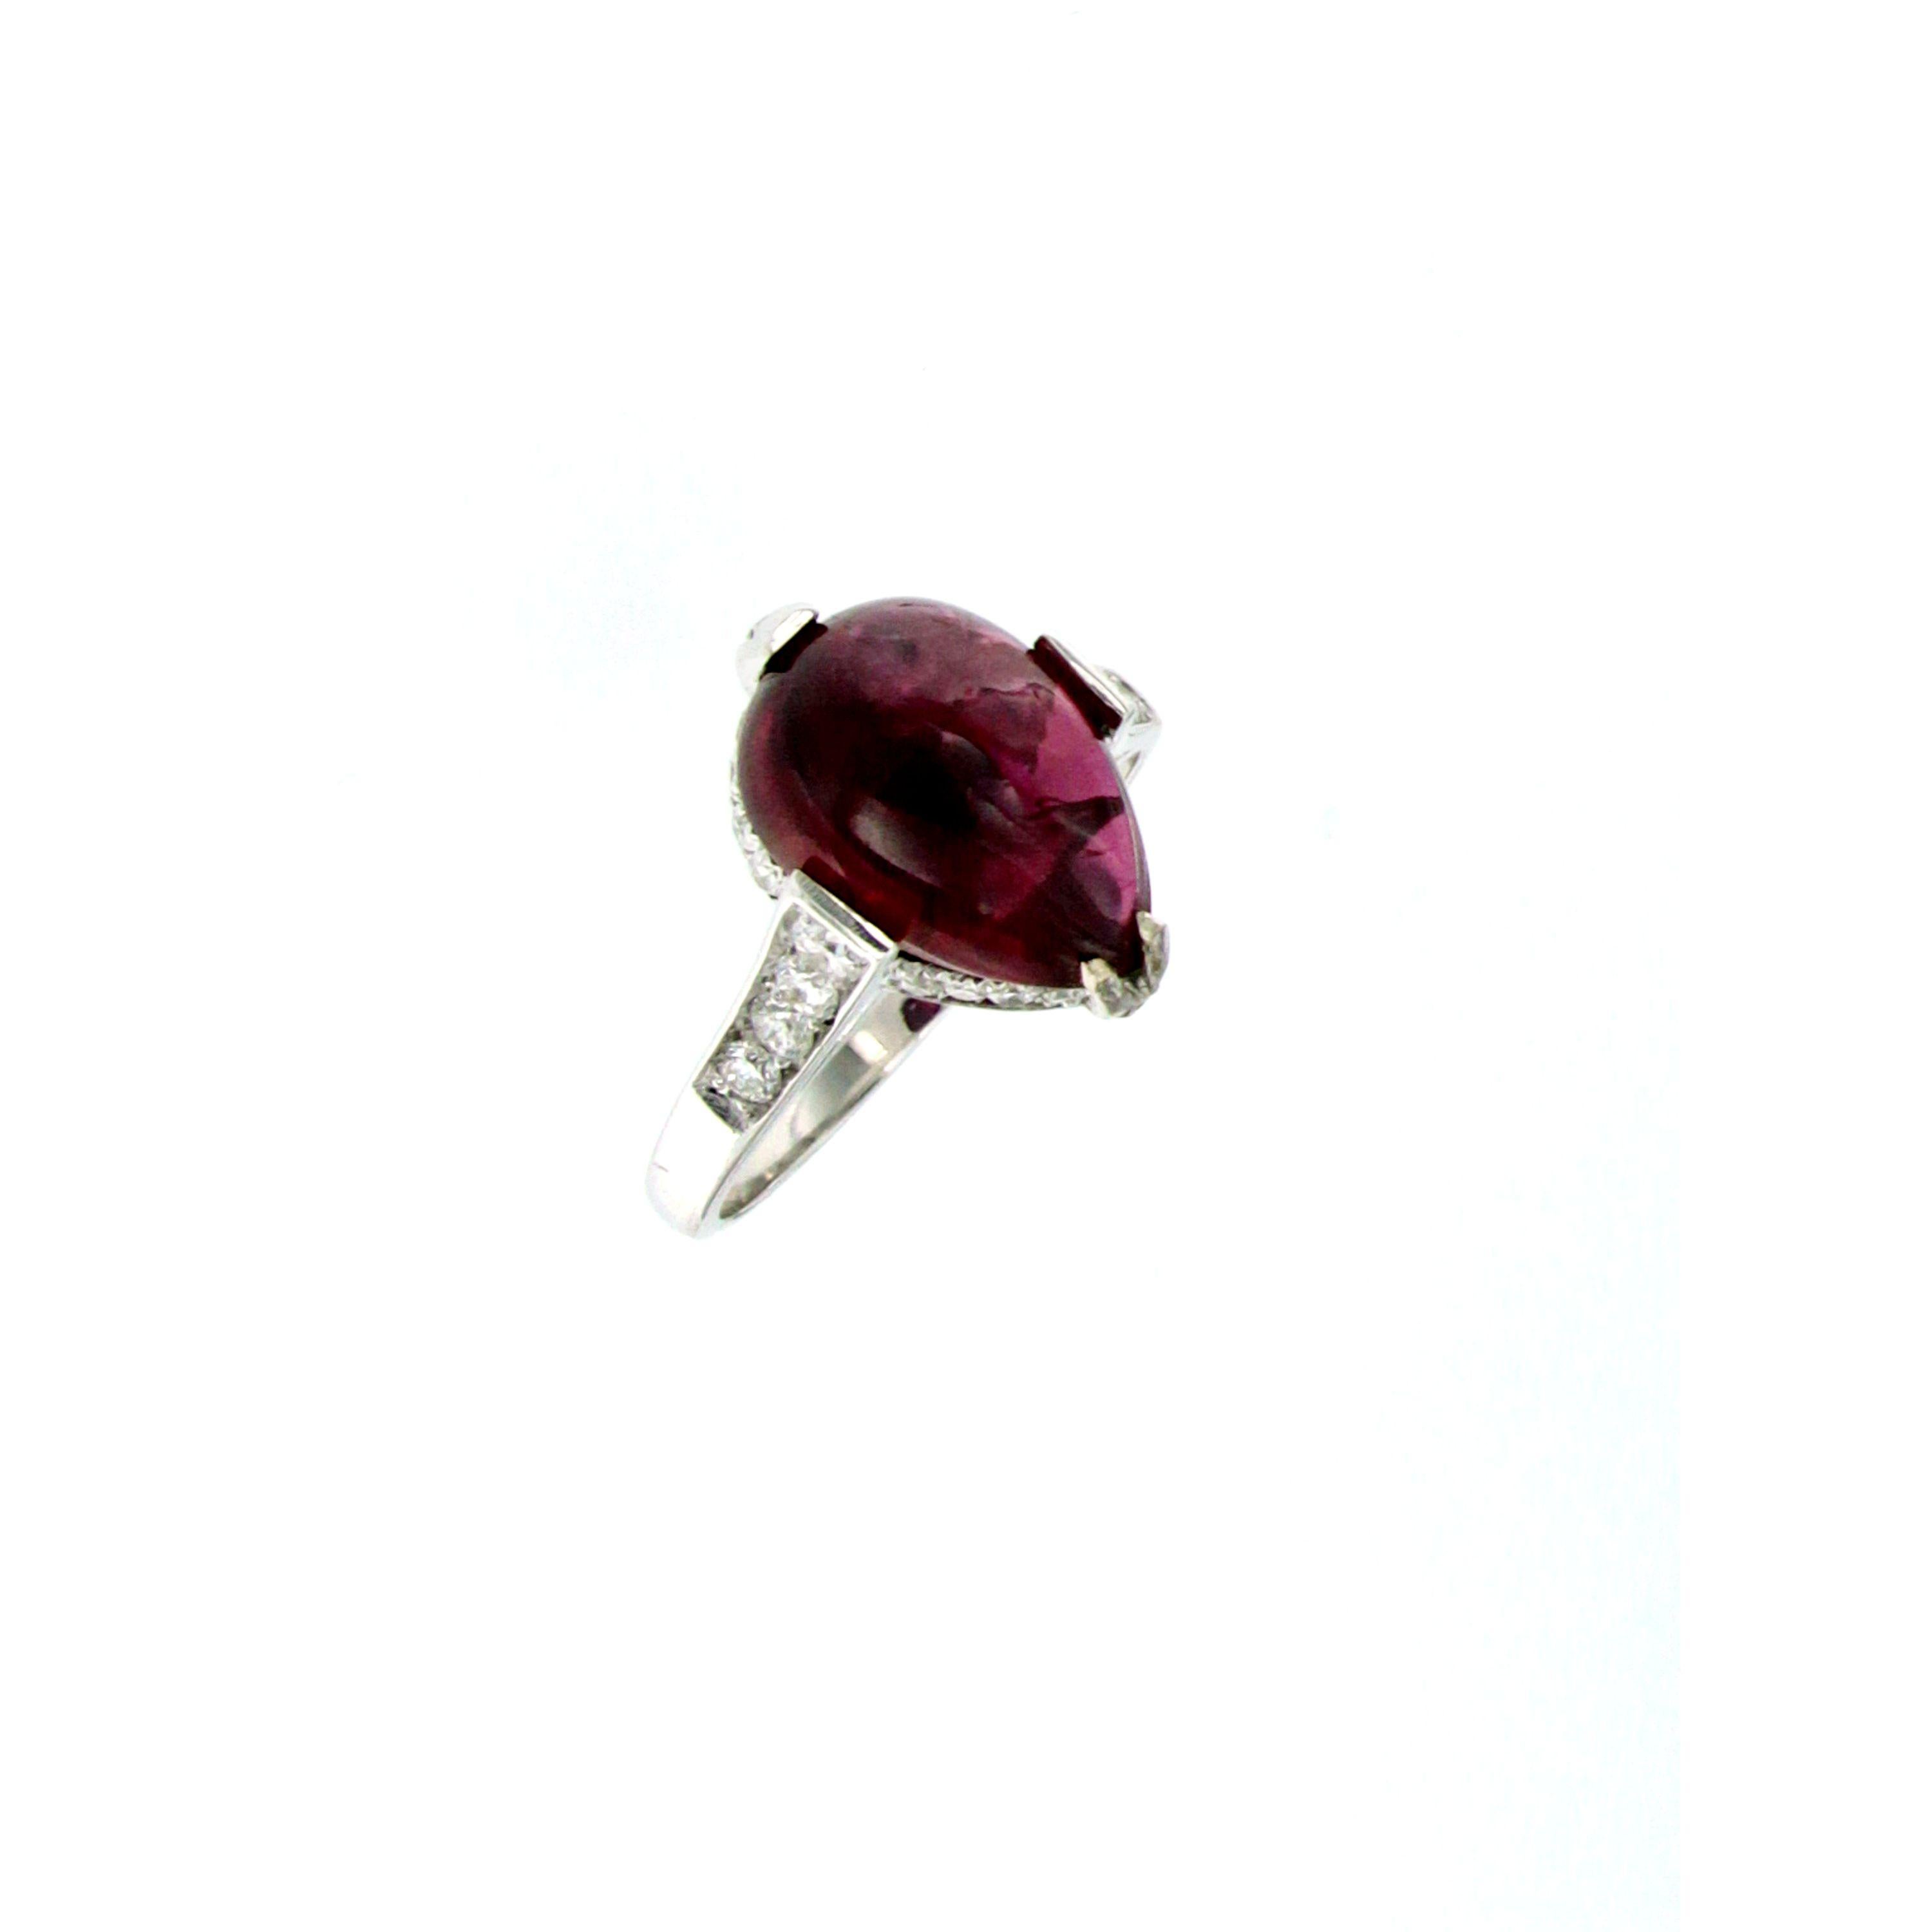 This beautiful and bright cocktail ring is set in the center with one large natural Pear Cabochon Cut Ruby with a vibrant and rich color, weight 5,89 ct. surrounded by 0,50 of colorless round brilliant cut diamonds graded G color VVS.

CONDITION: